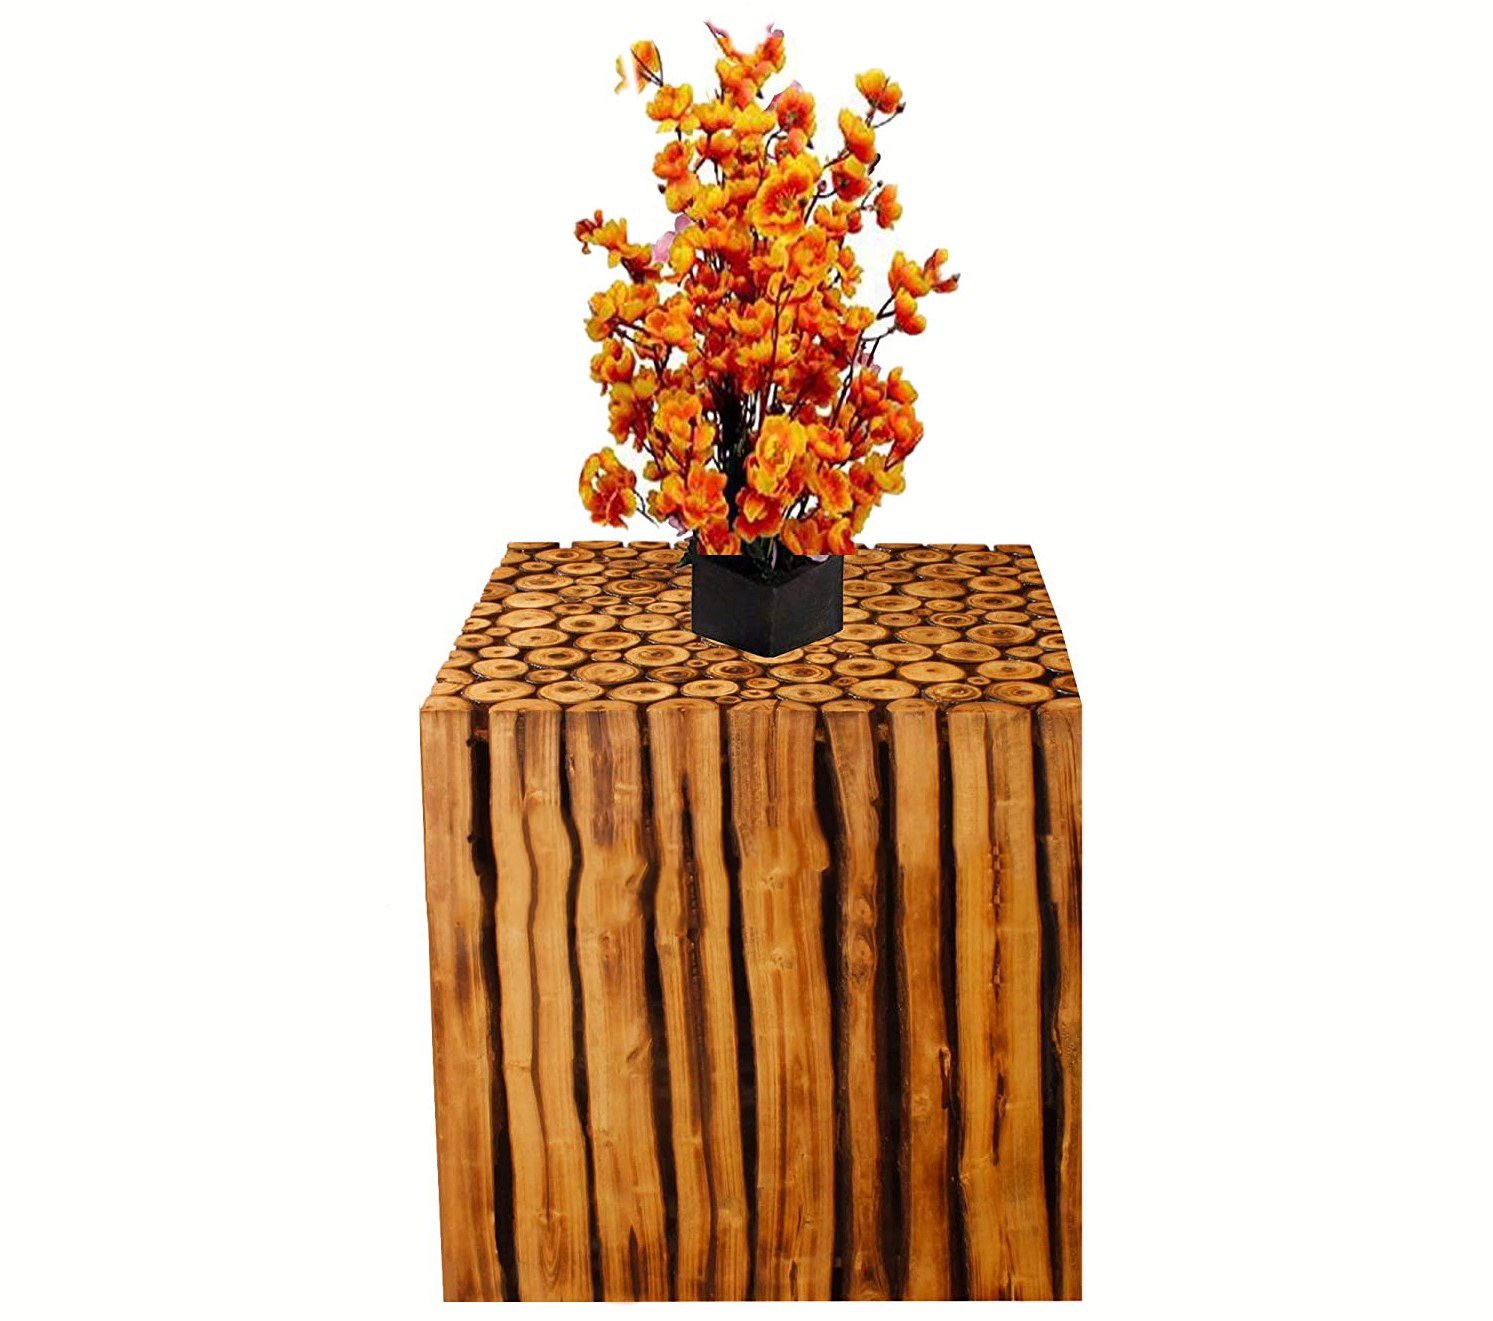 12 Inch Wooden Square Shape Stool